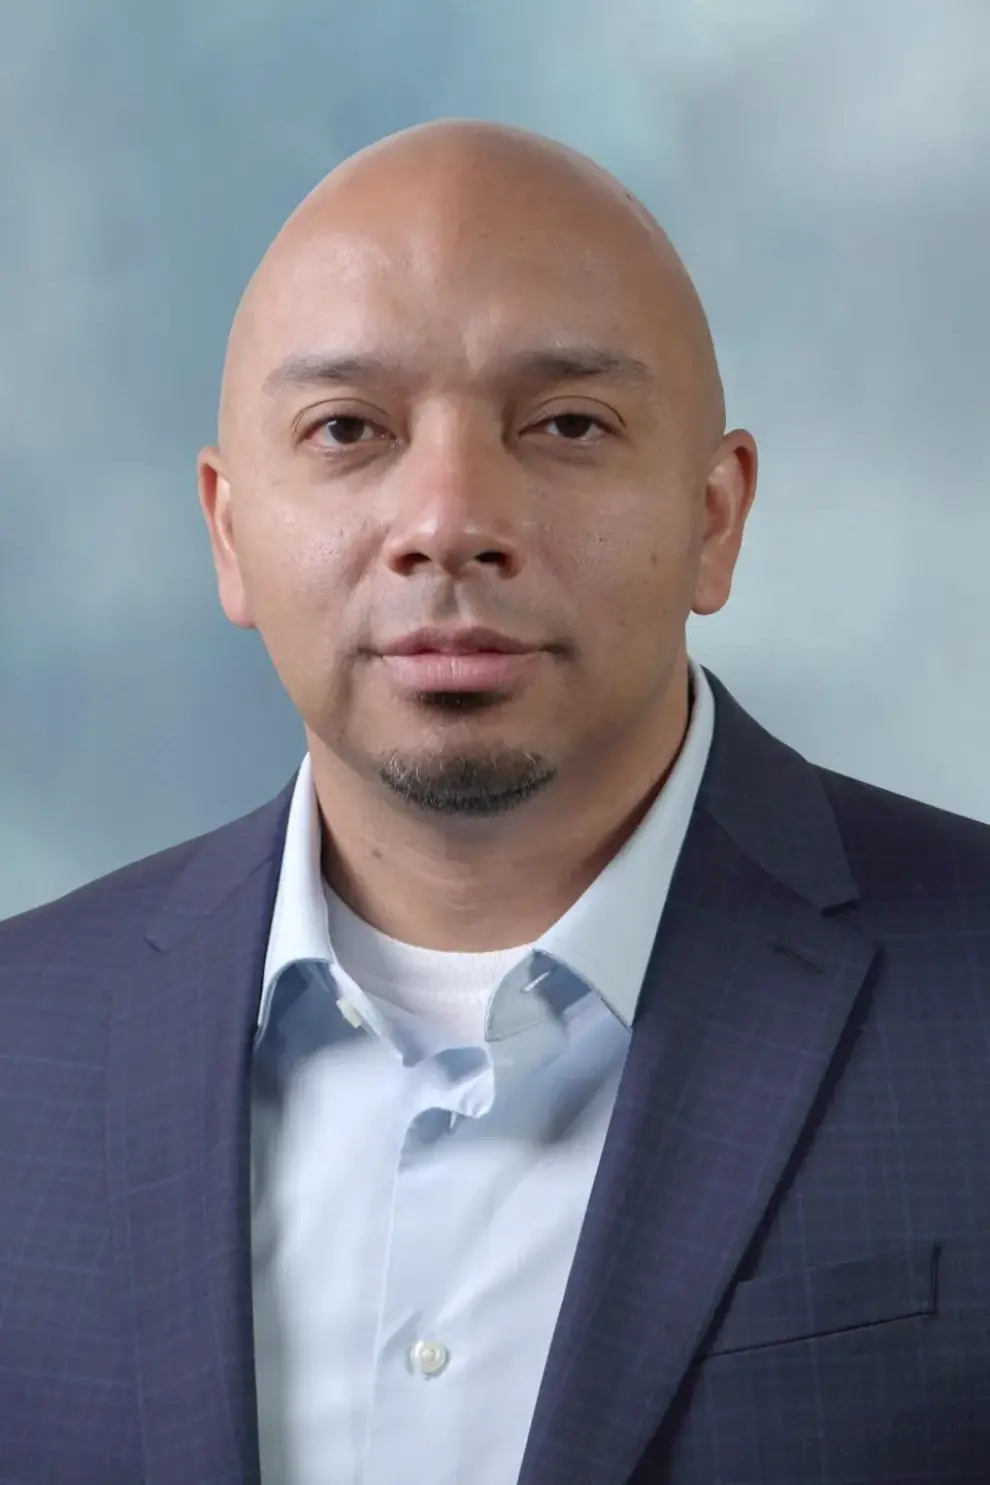 Vortex Appoints Johnathan Gonzalez as Vice President, Health, Safety, and Environmental